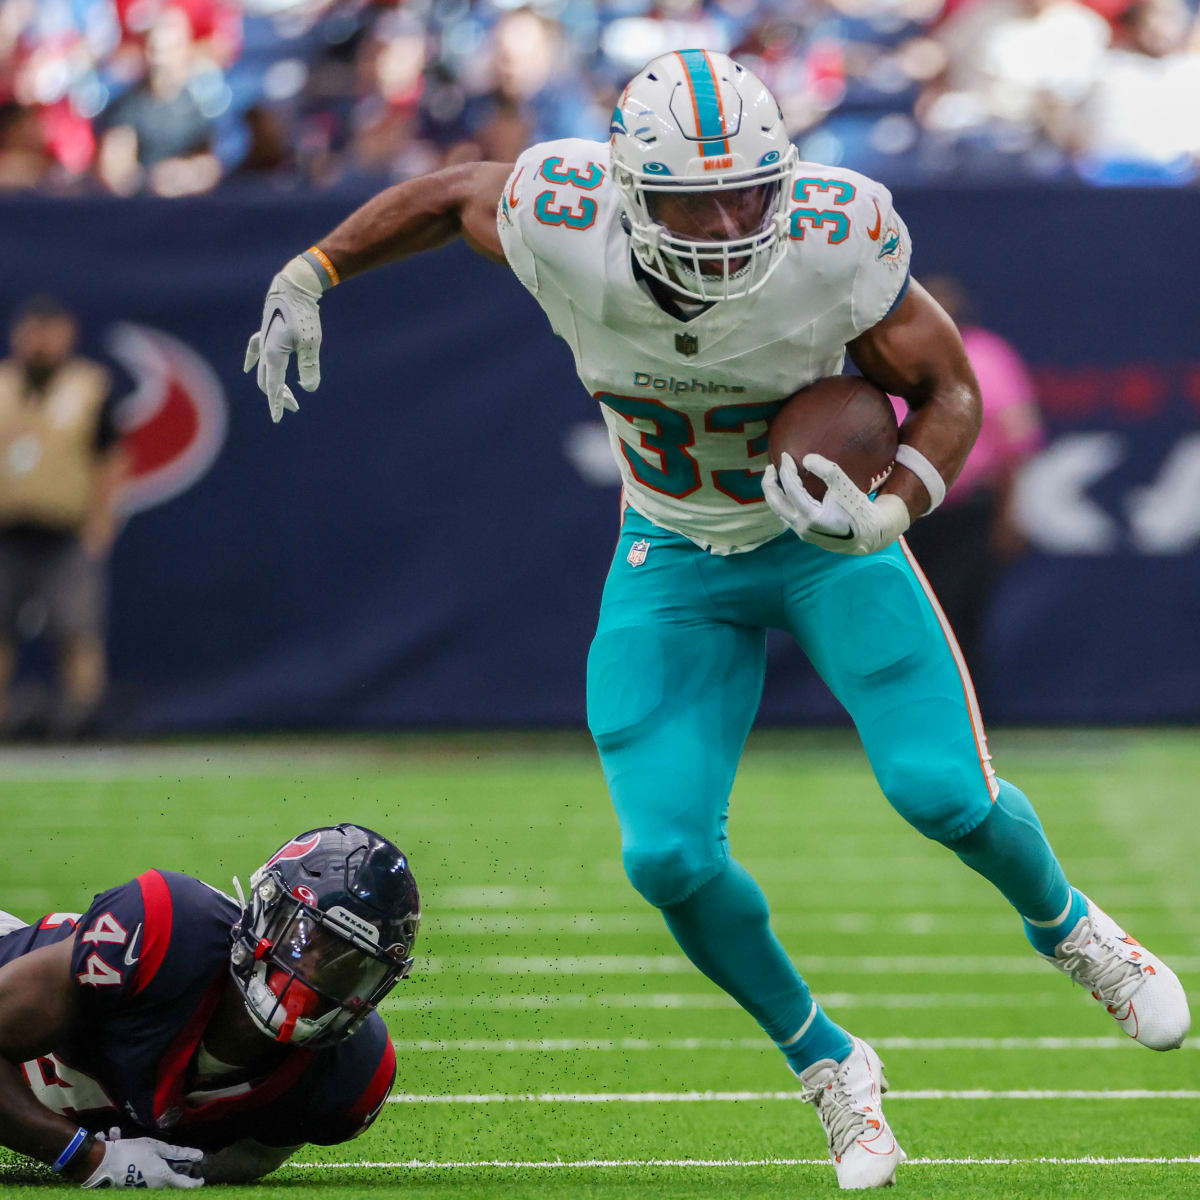 Dolphins at Jaguars Free Live Stream NFL Online, Channel, Time - How to Watch and Stream Major League and College Sports